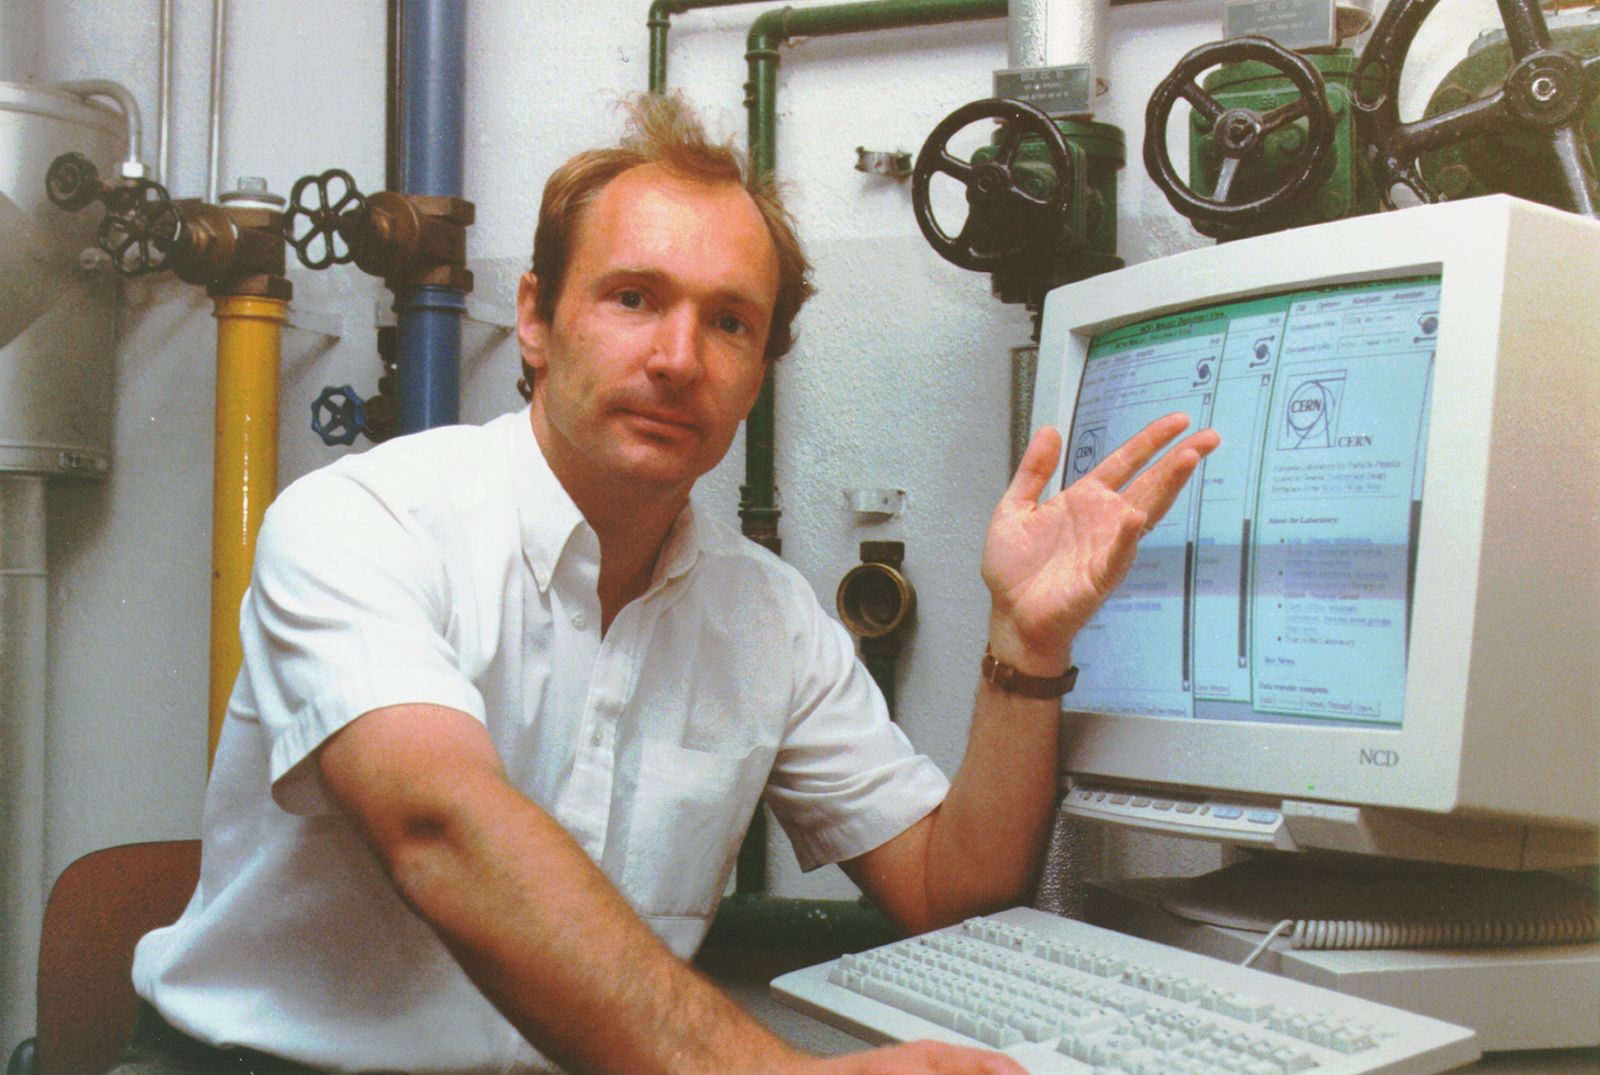 The World Wide Web's inventor sold its original code for $5.4